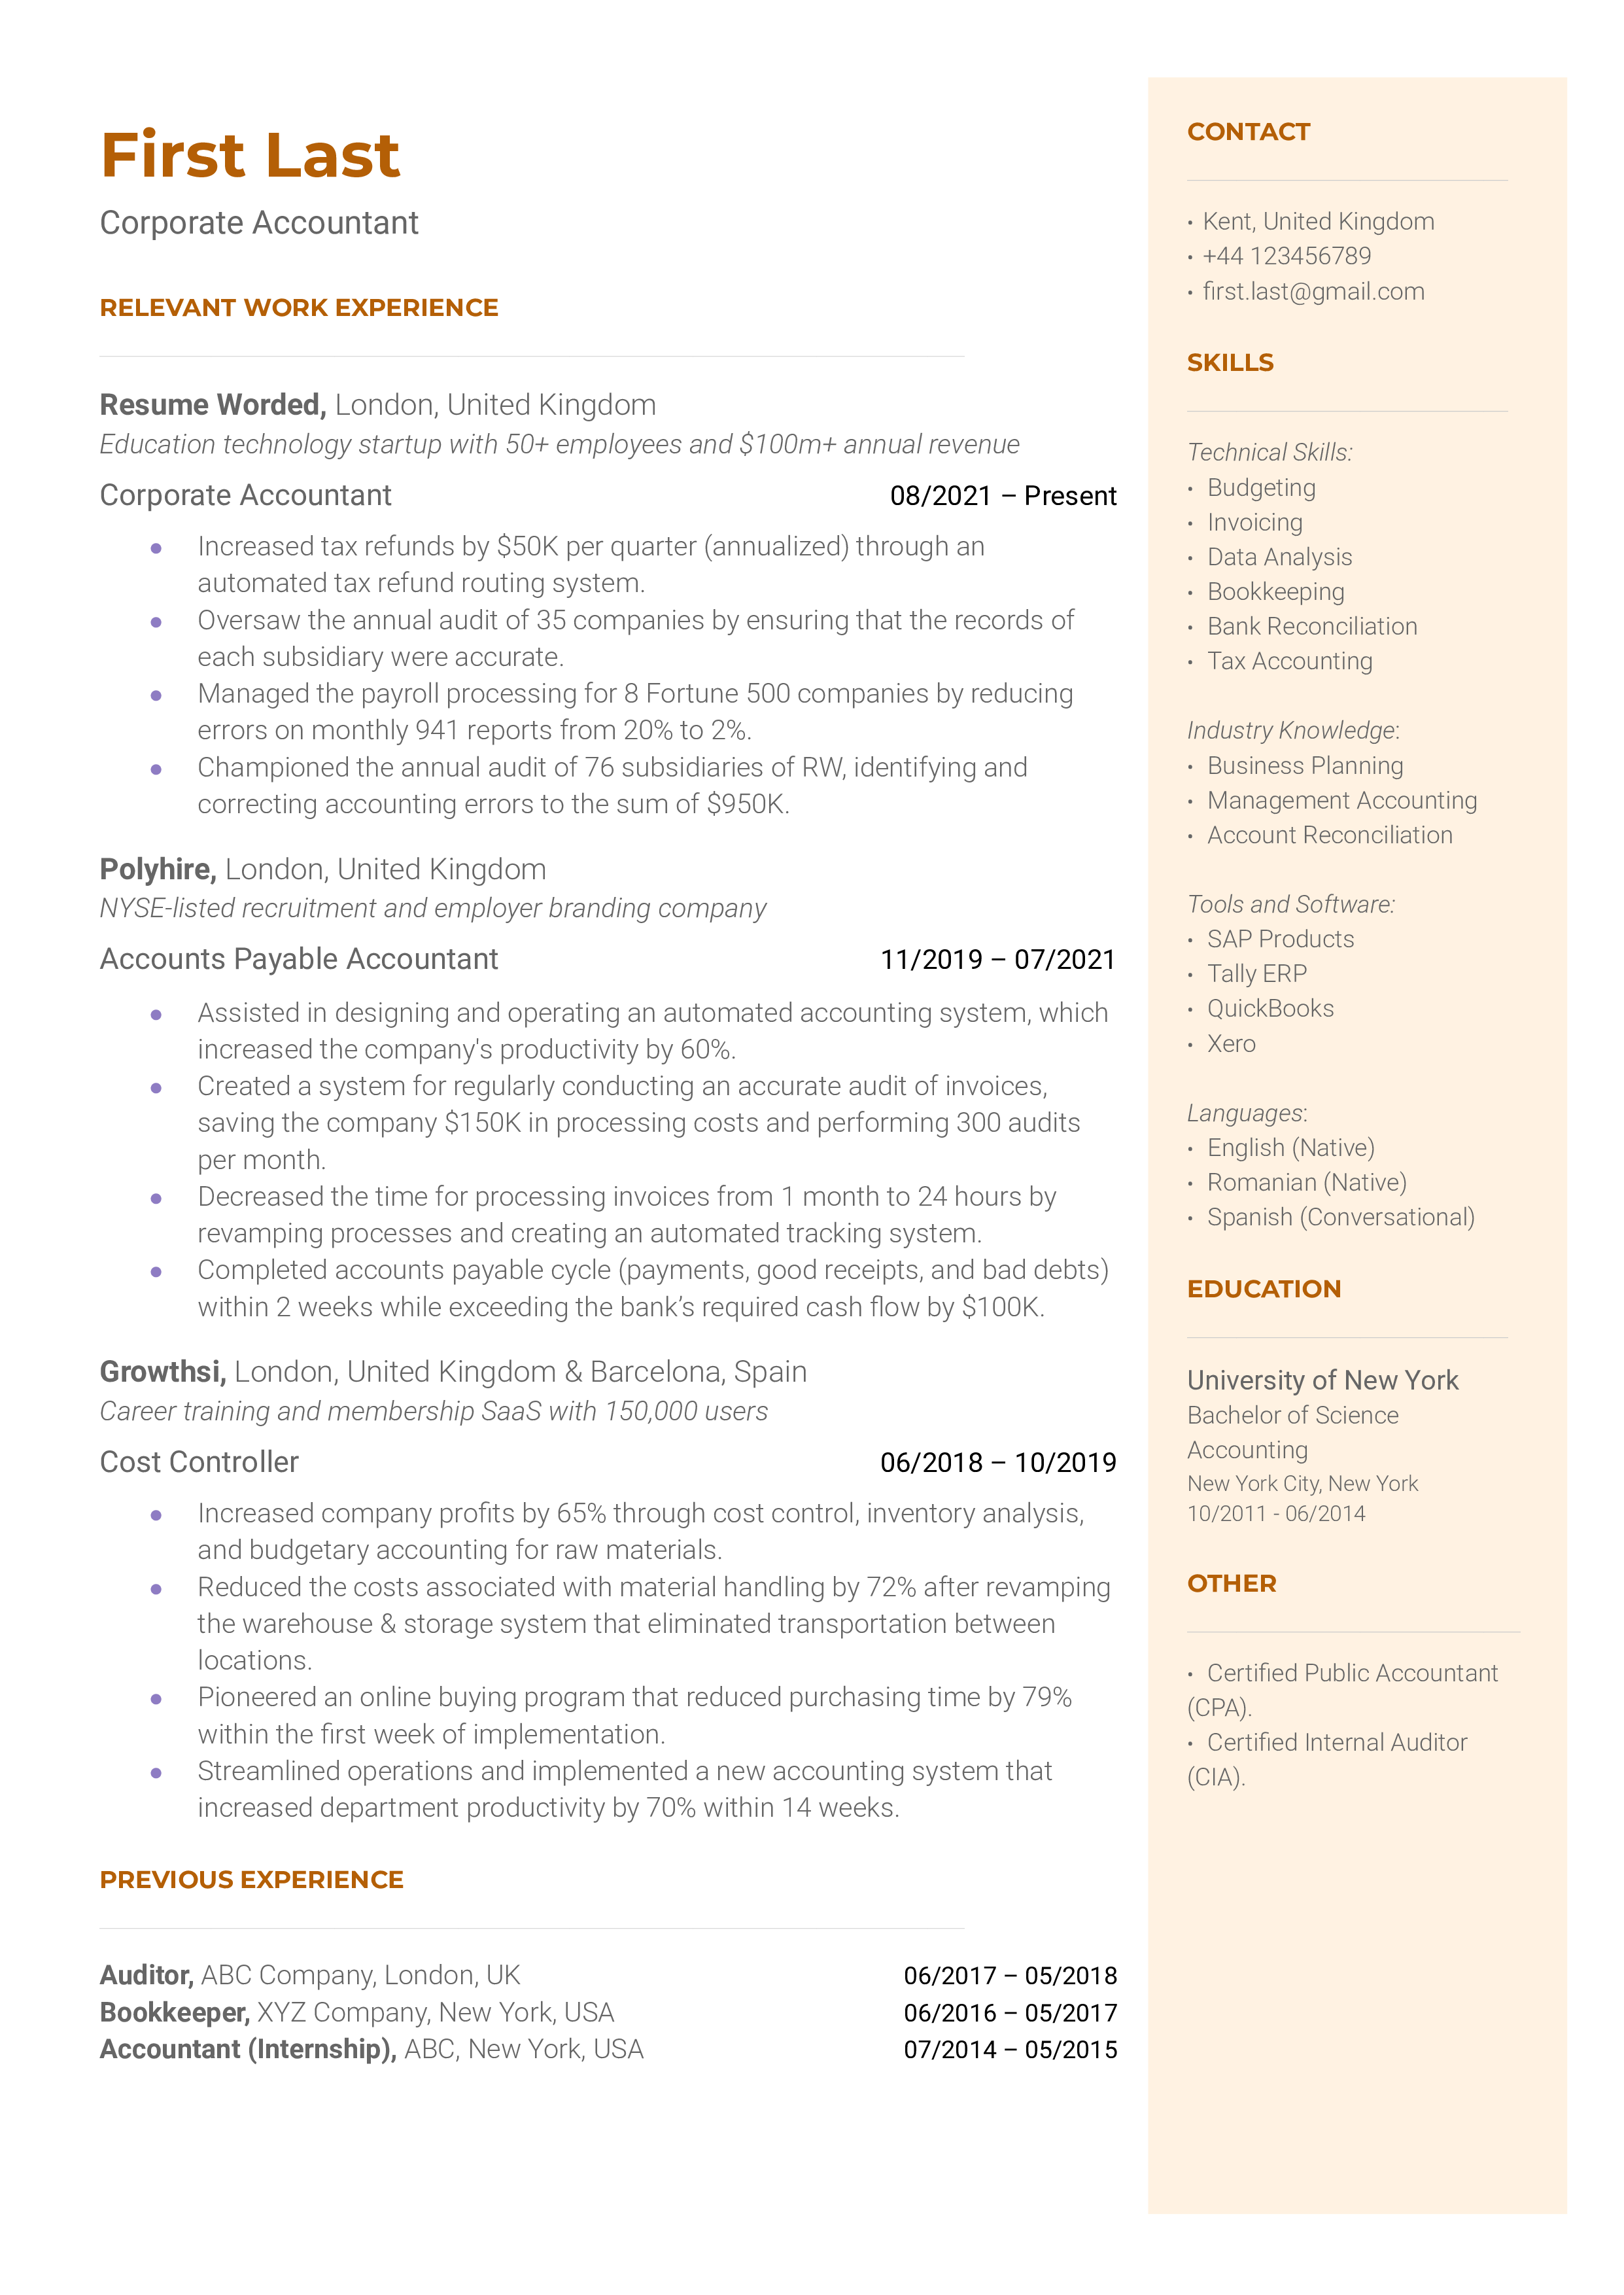 A well-structured CV of a corporate accountant showcasing proficiency in financial management tools and strategic planning abilities.